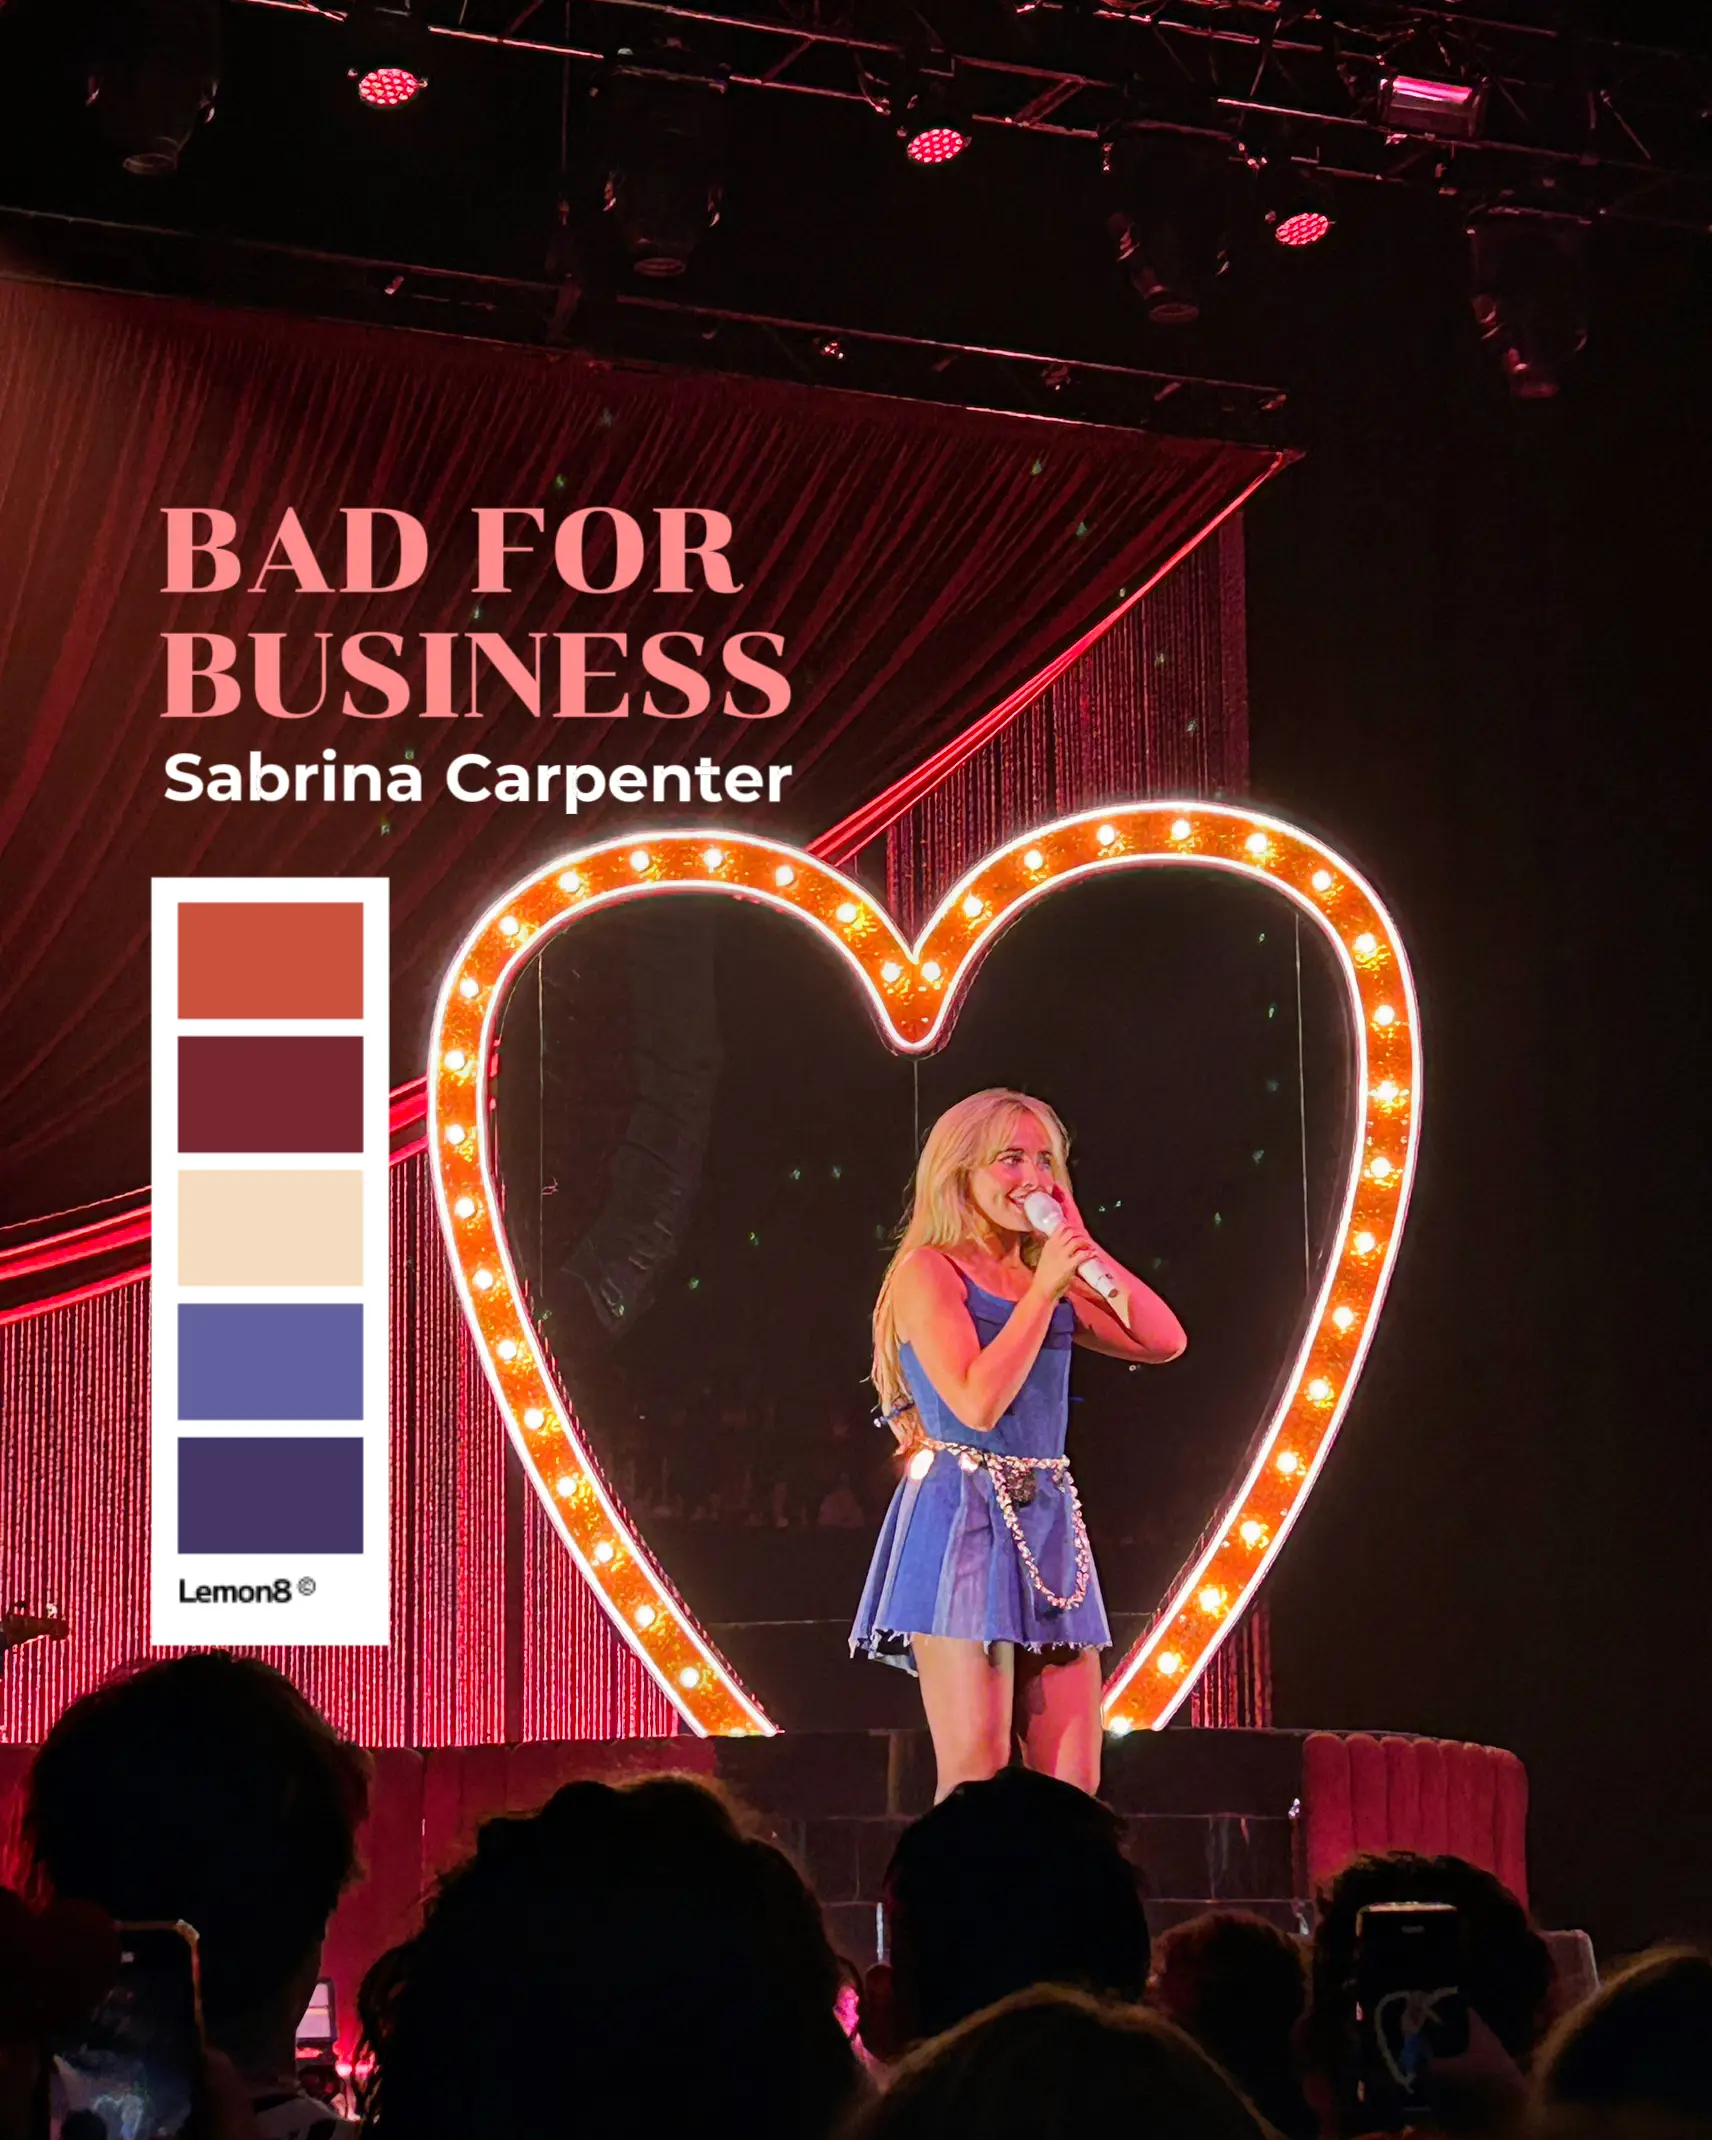 Bad For Business by Sabrina Carpenter 💌's images